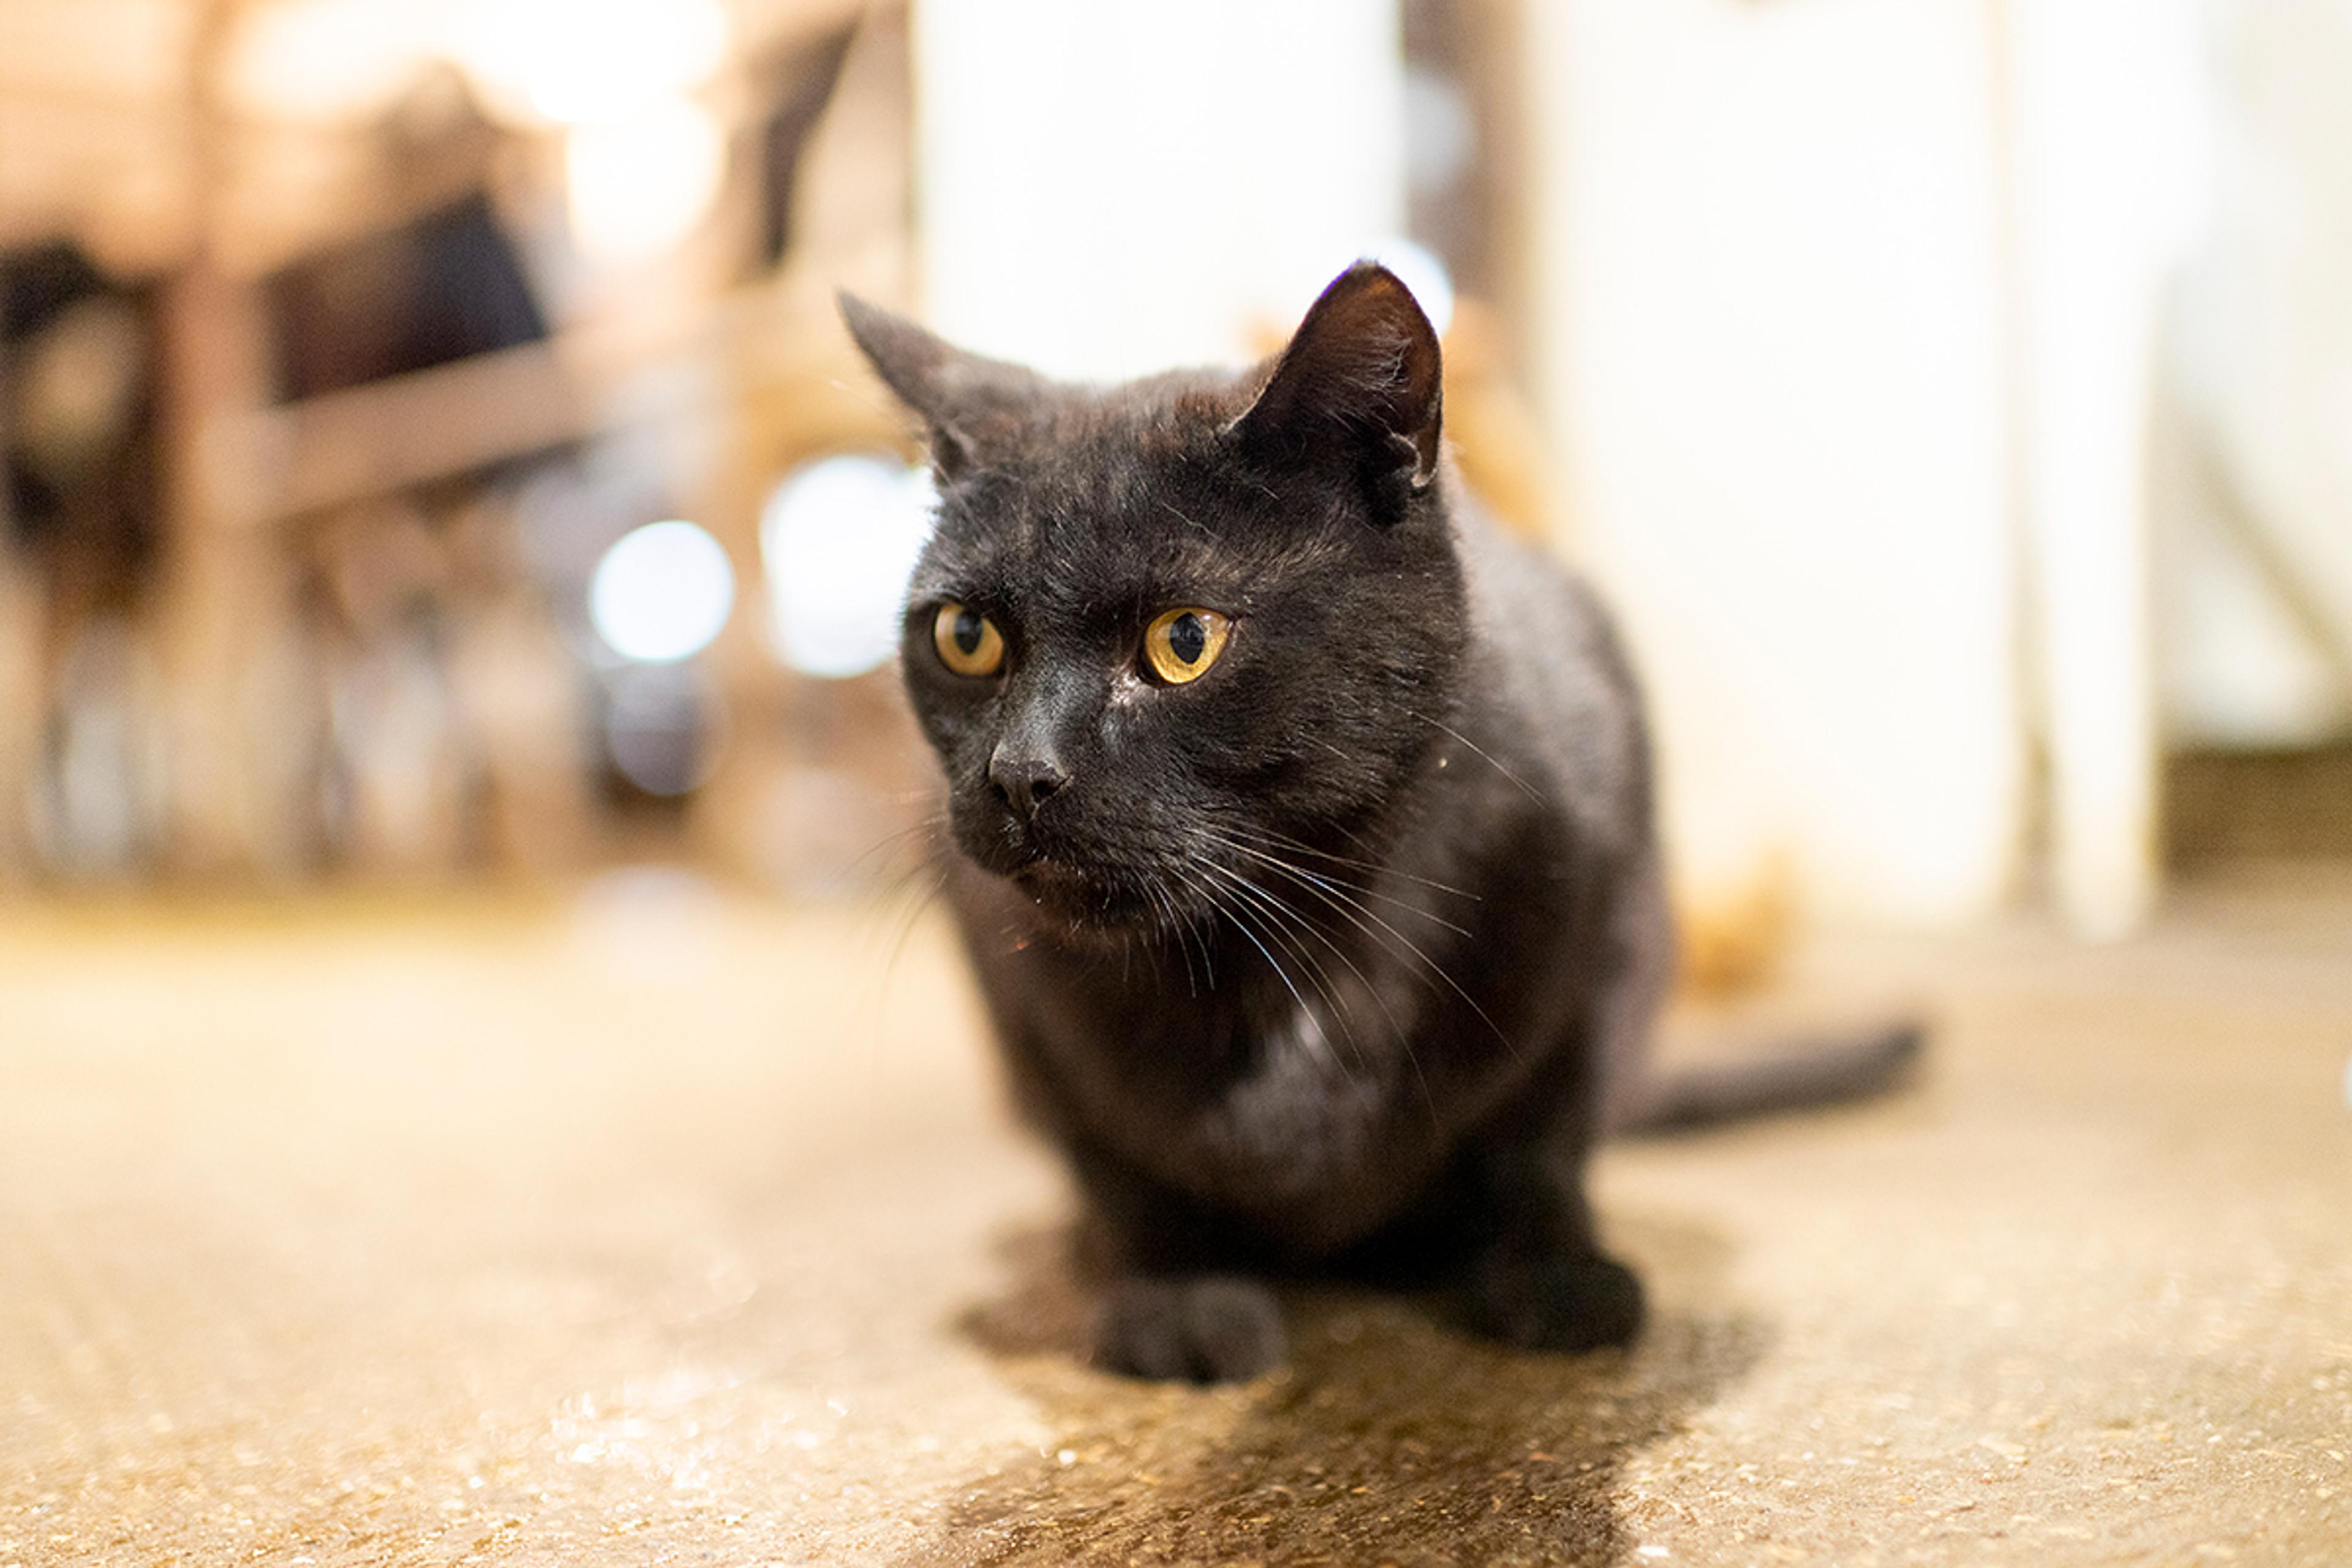 A black cat crouches on the floor and looks at something off camera.